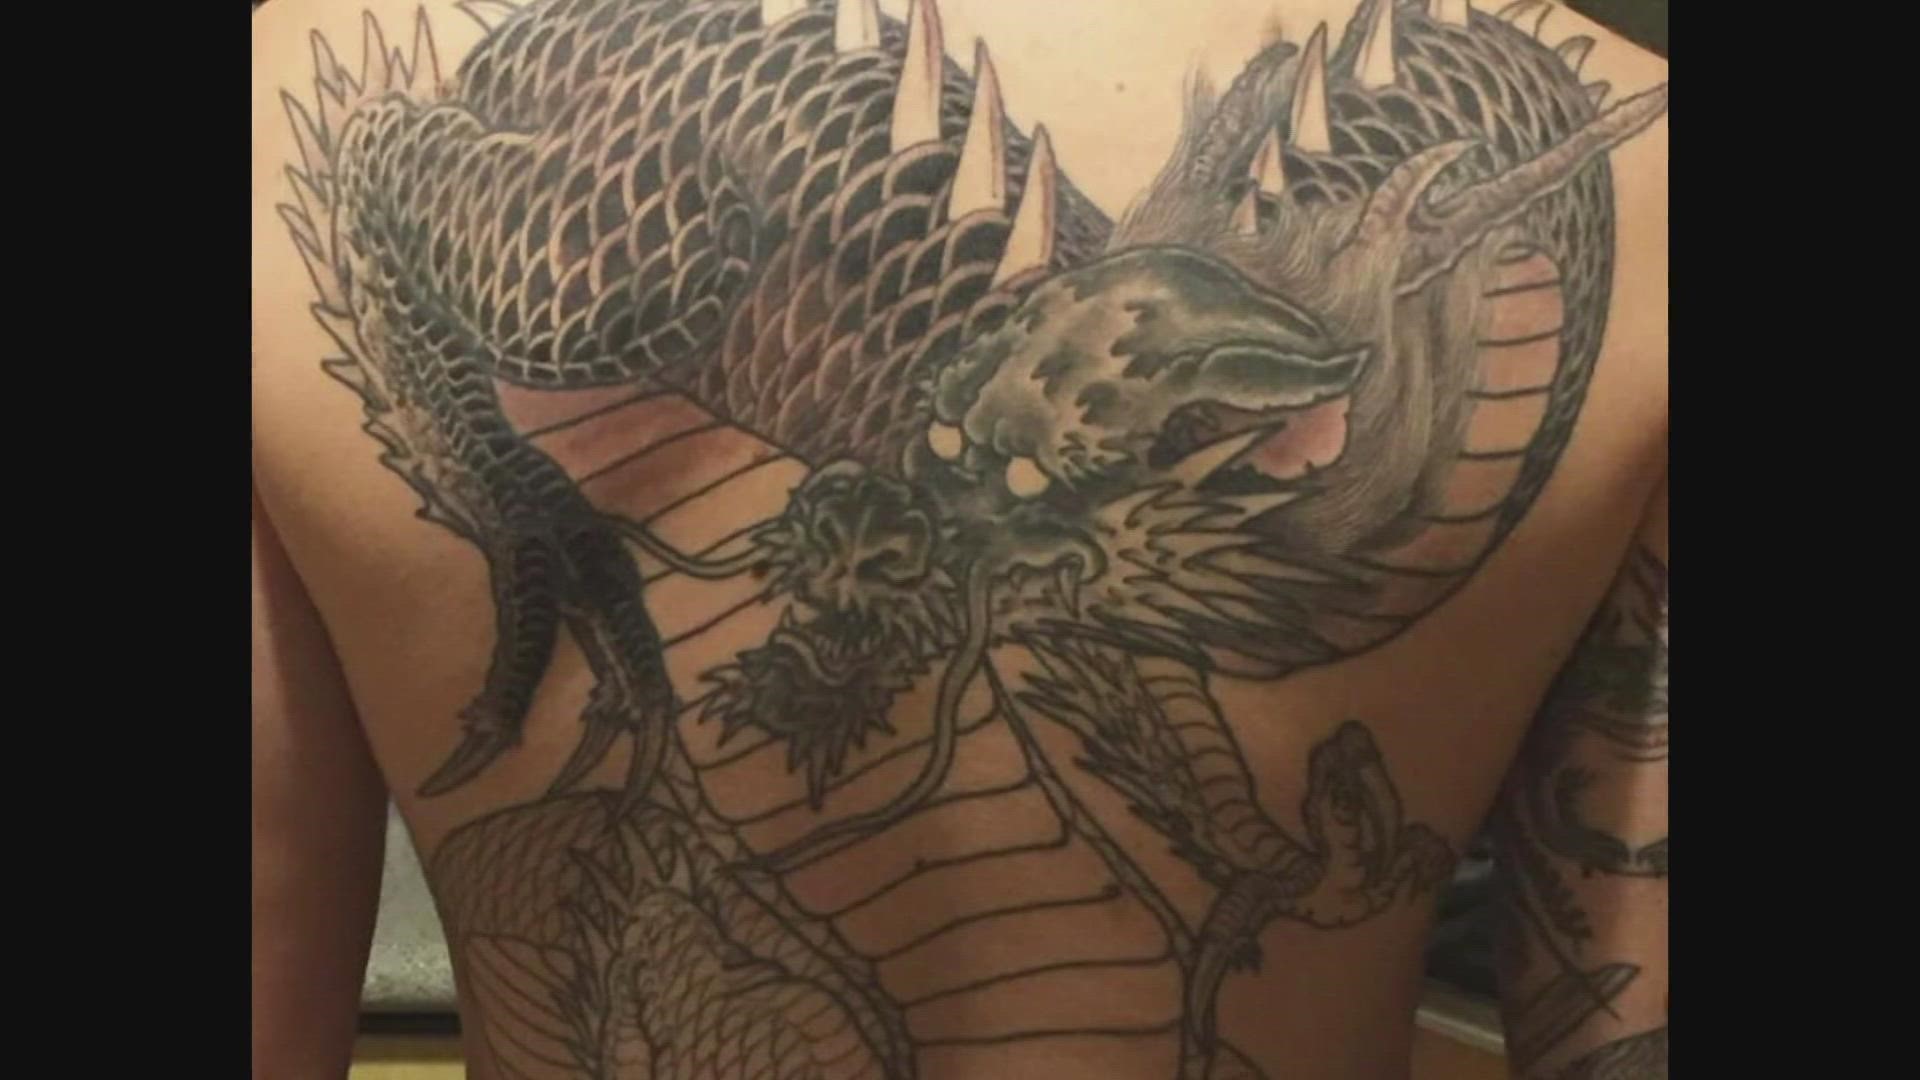 What to see at the Seattle Tattoo Expo this weekend  king5com